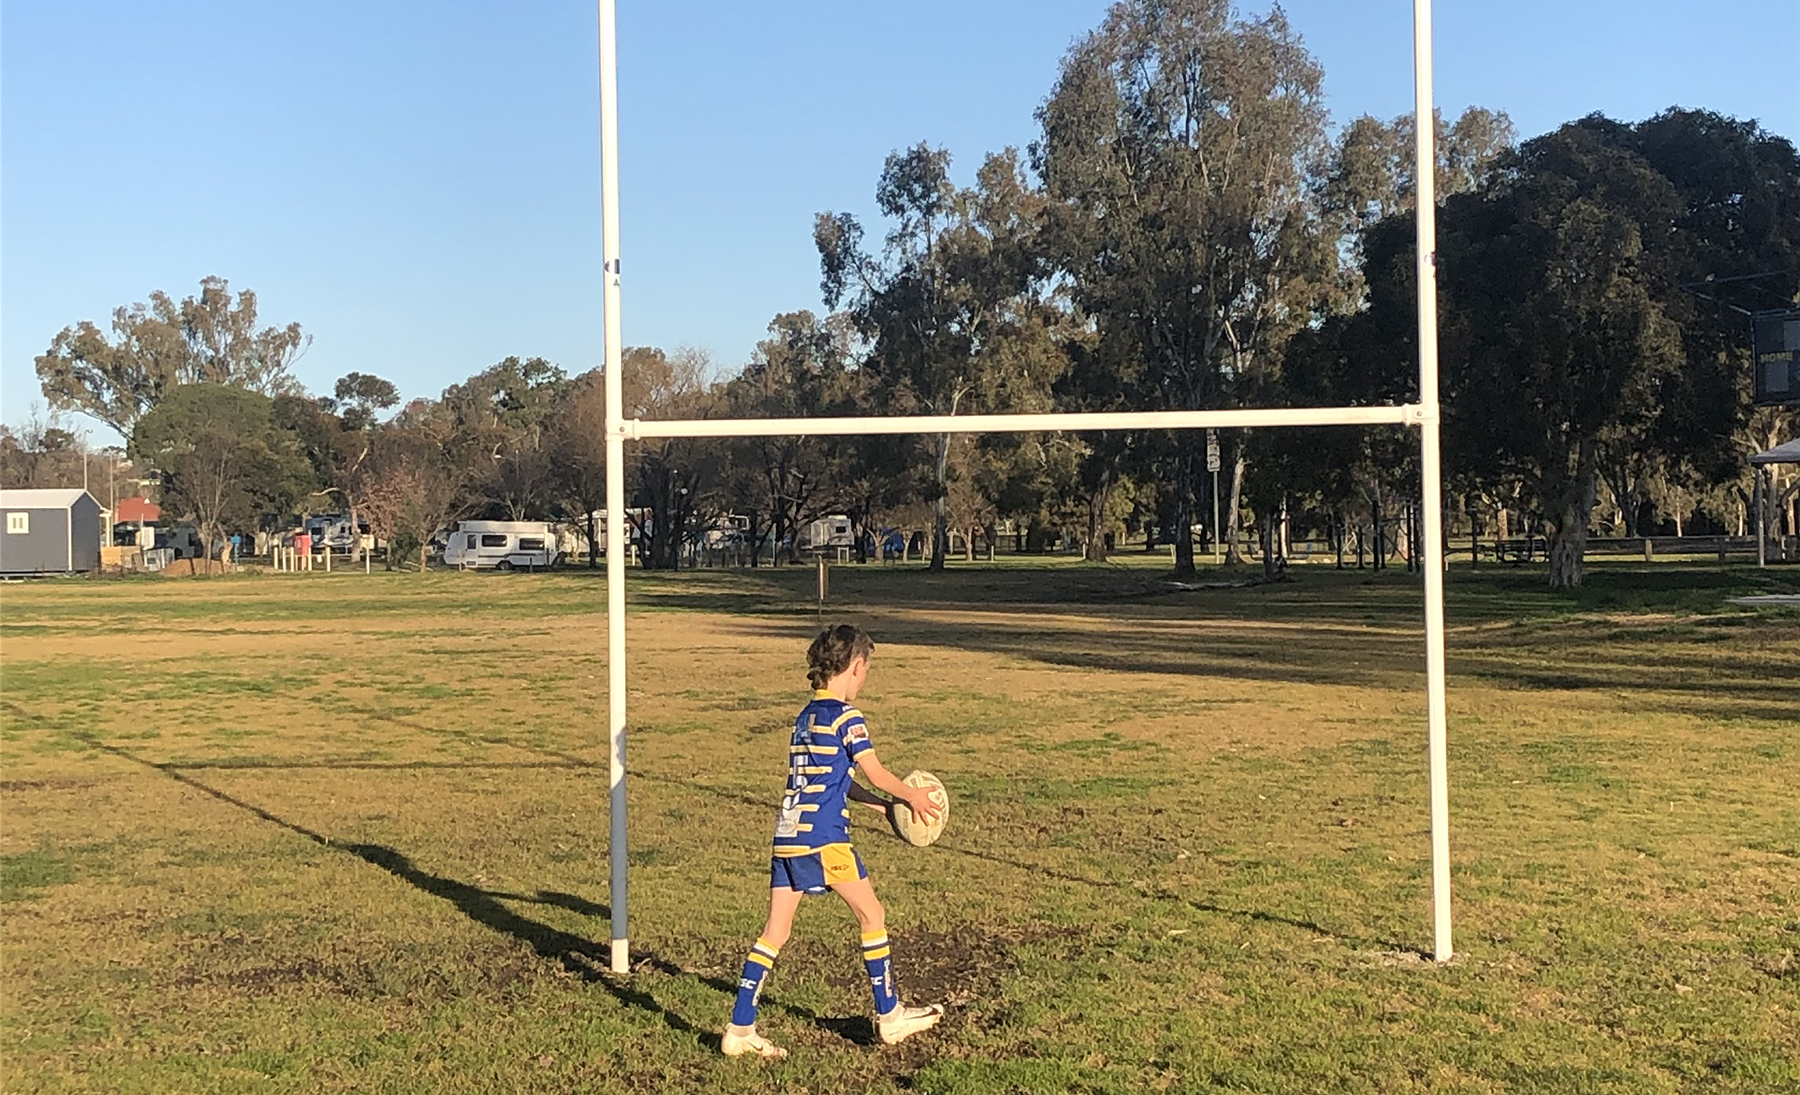 Kicking for goal at Junee Junior Rugby League